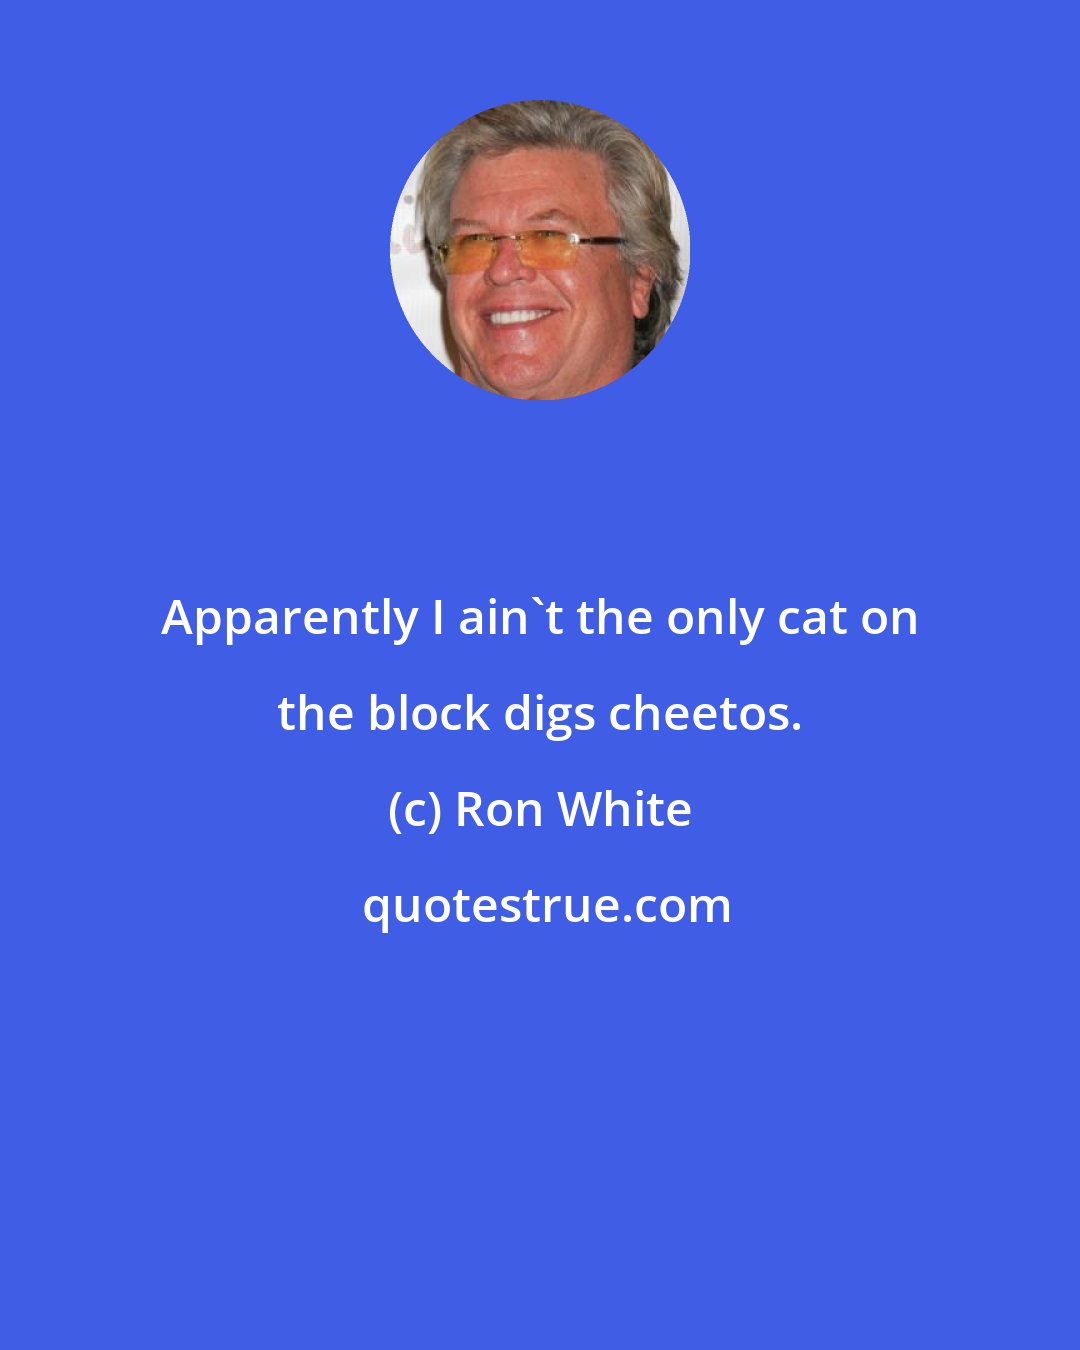 Ron White: Apparently I ain't the only cat on the block digs cheetos.